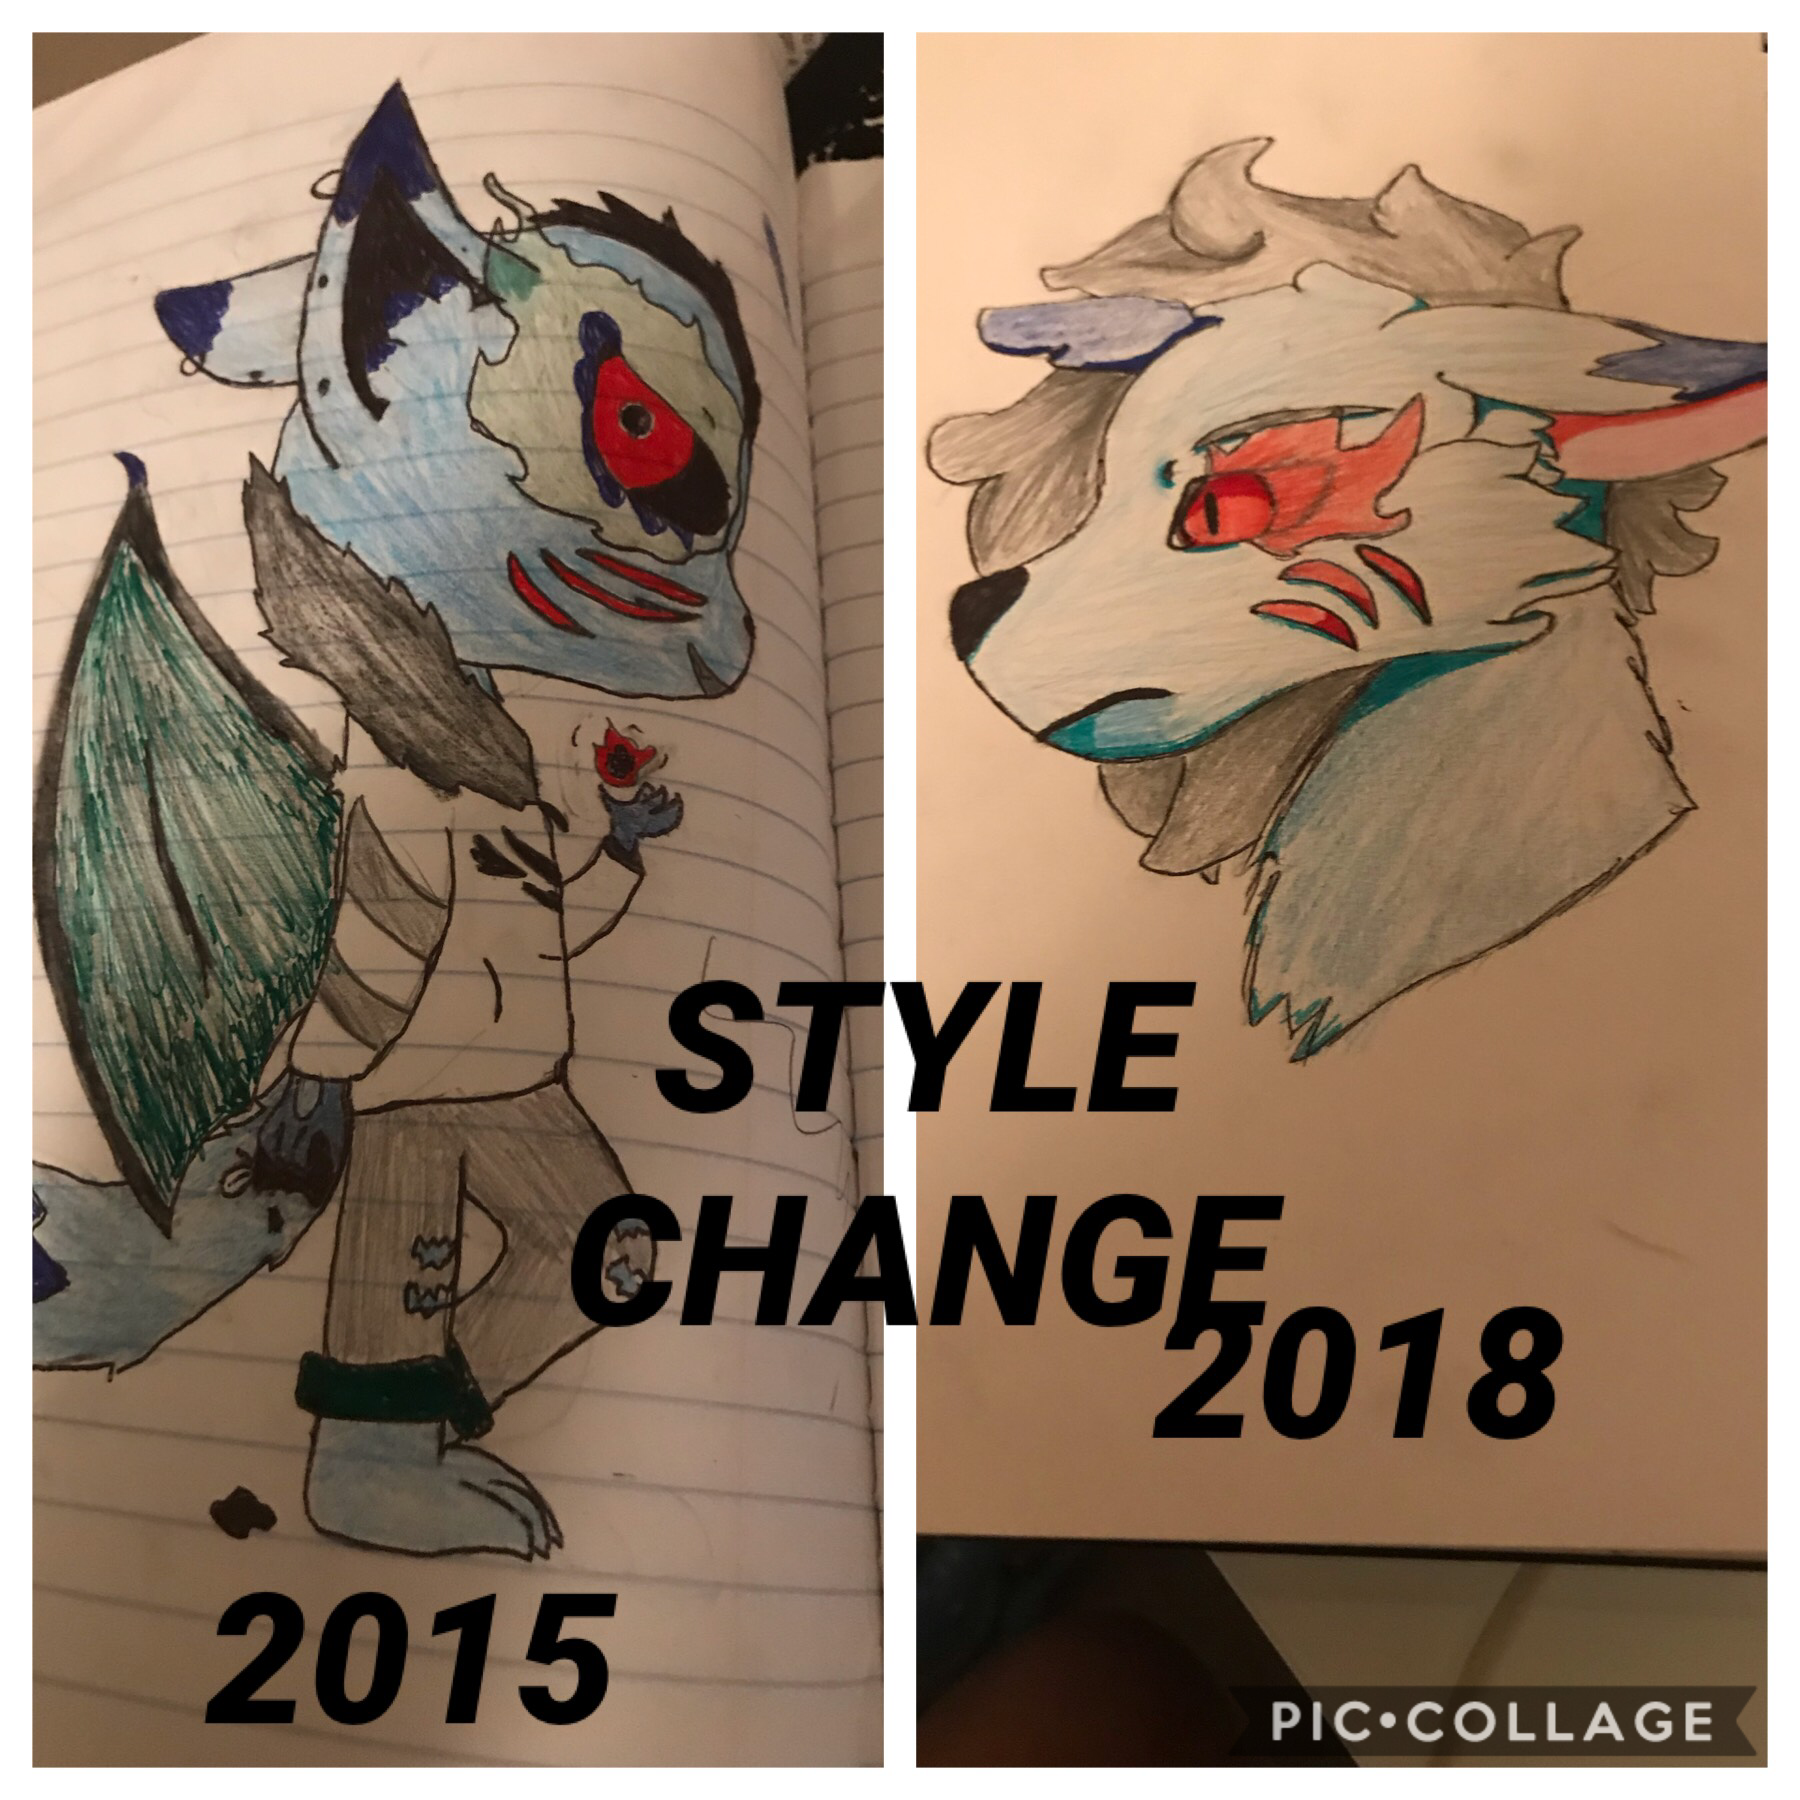 Style has been changed